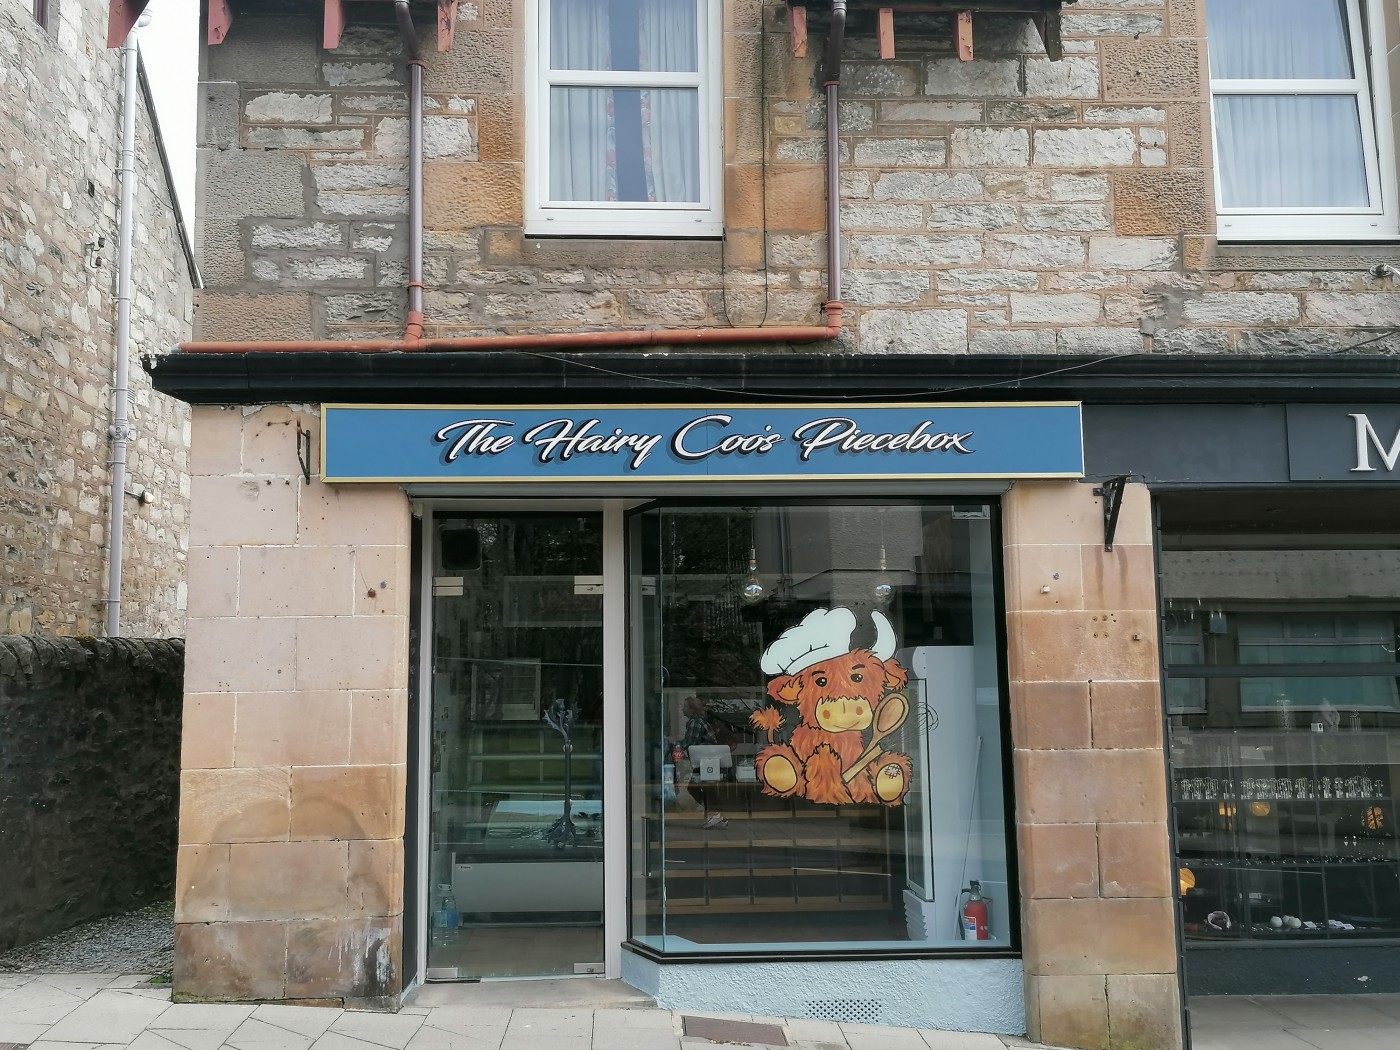 The Hairy Coo's Piecebox - Bakery in Pitlochry